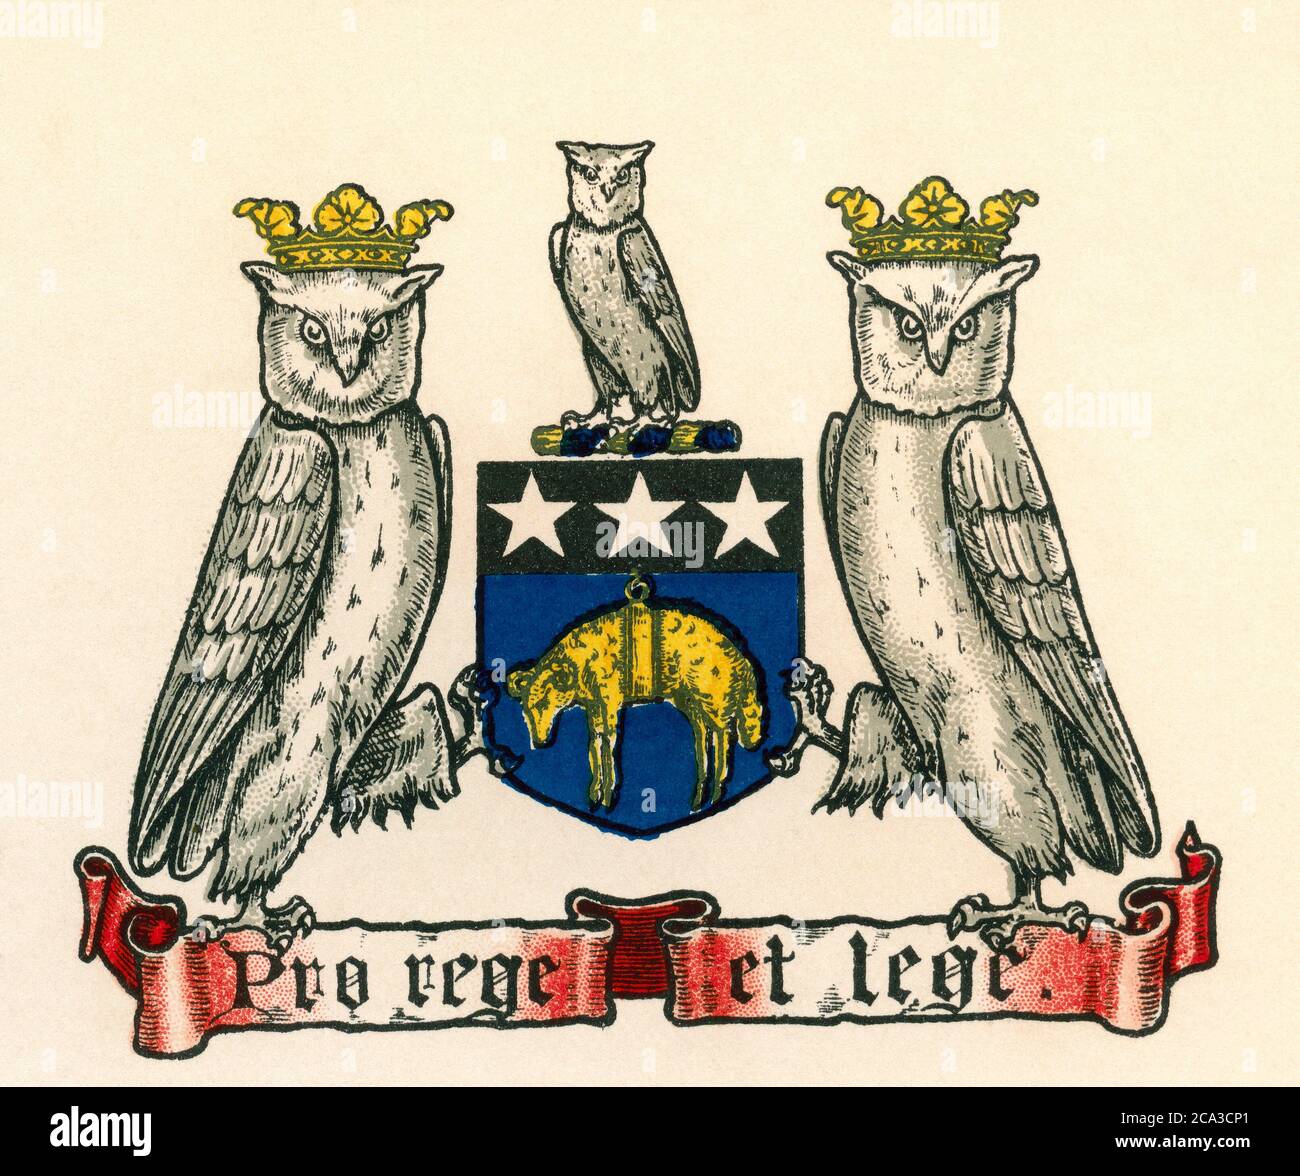 Coat of arms of Leeds, England. These arms were used prior to 1921. From The Business Encyclopaedia and Legal Adviser, published 1907. Stock Photo